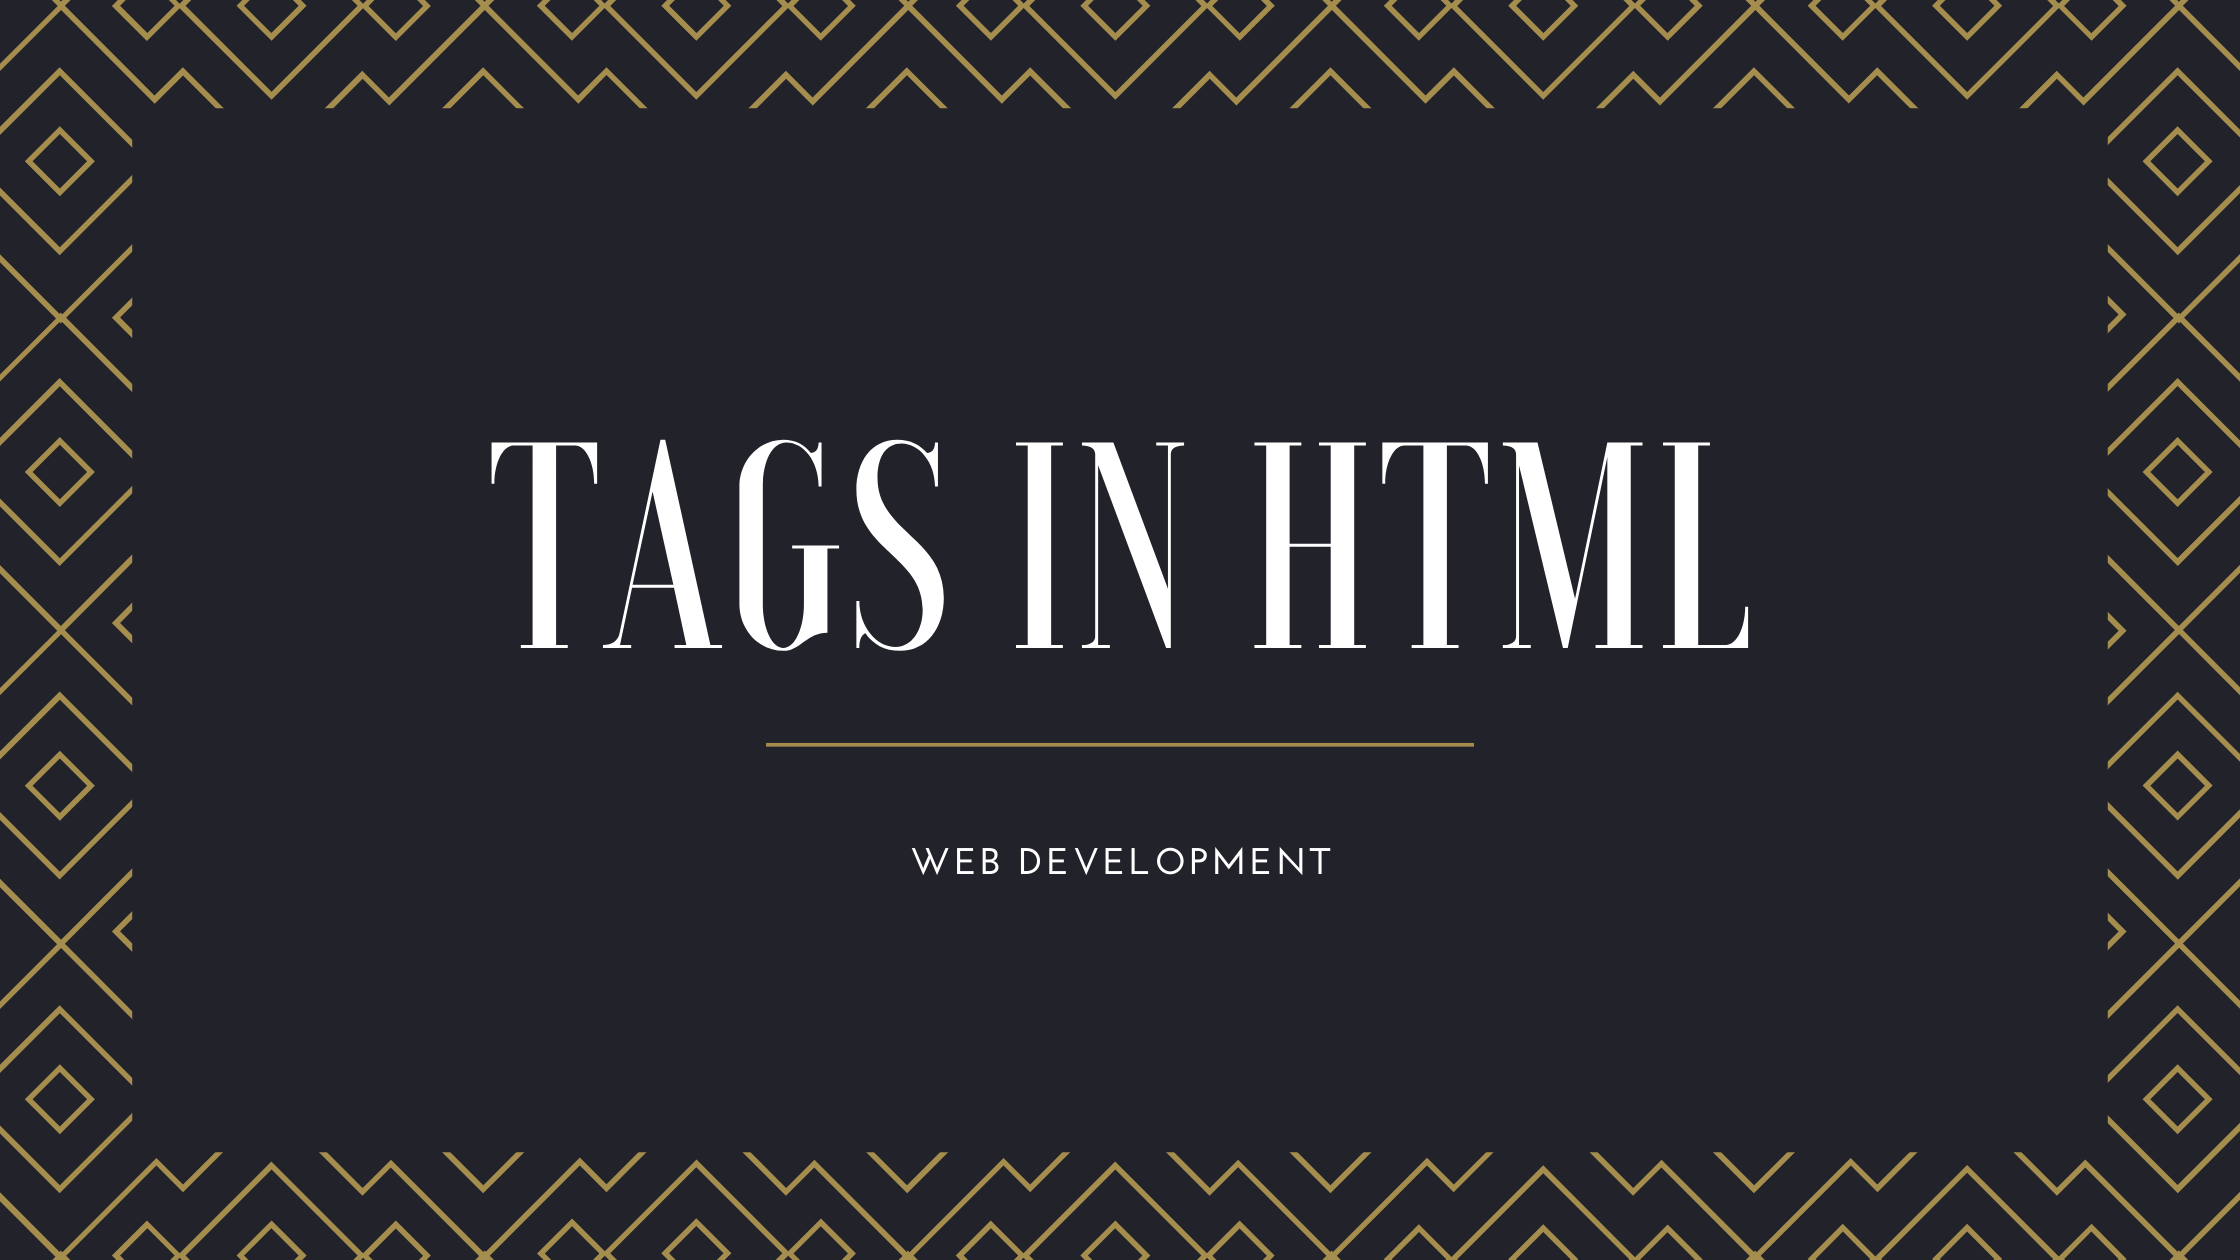 You are currently viewing Tags in HTML | Web Development